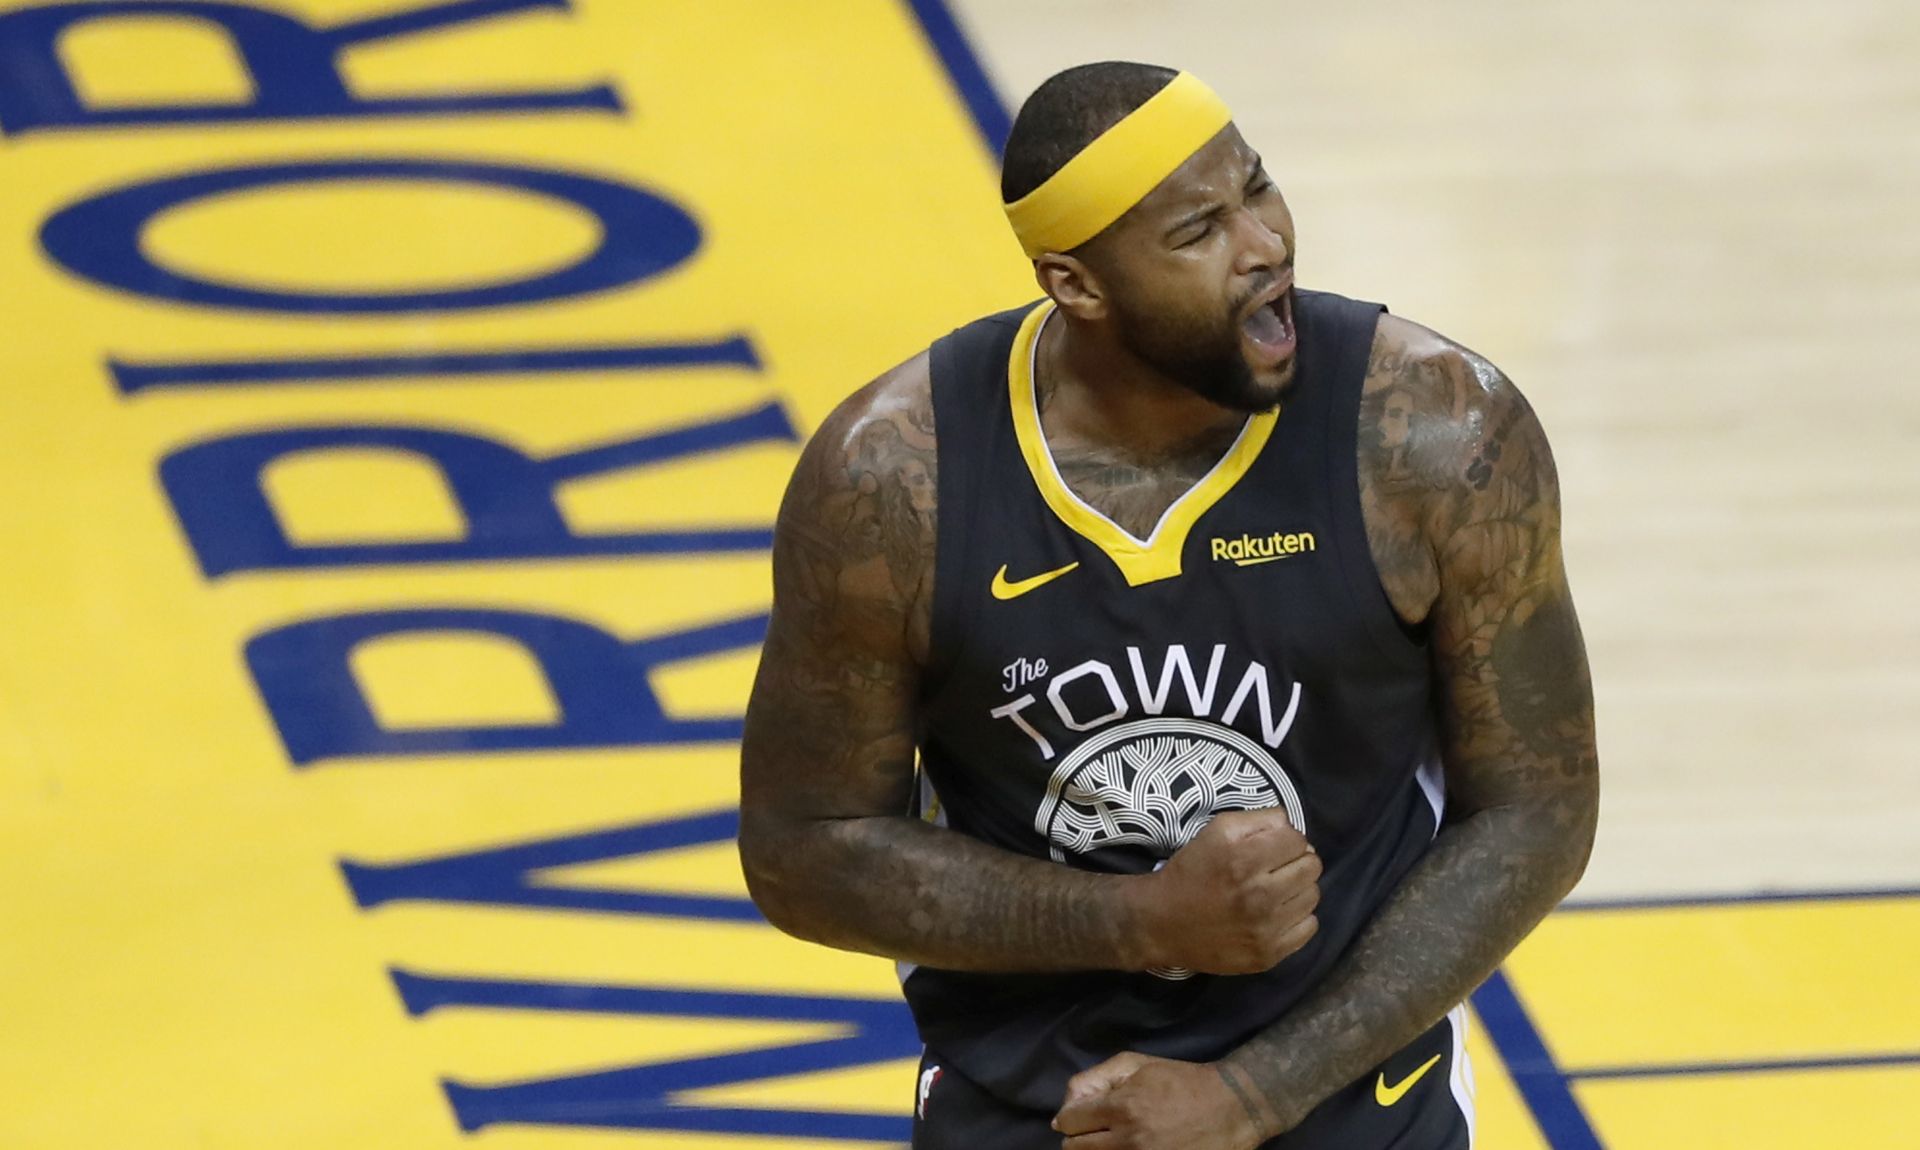 epa07349272 Golden State Warriors center DeMarcus Cousins reacts after drawing a foul by the San Antonio Spurs during the second half of their game at Oracle Arena in Oakland, California, 06 February 2019.  EPA/JOHN G. MABANGLO SHUTTERSTOCK OUT